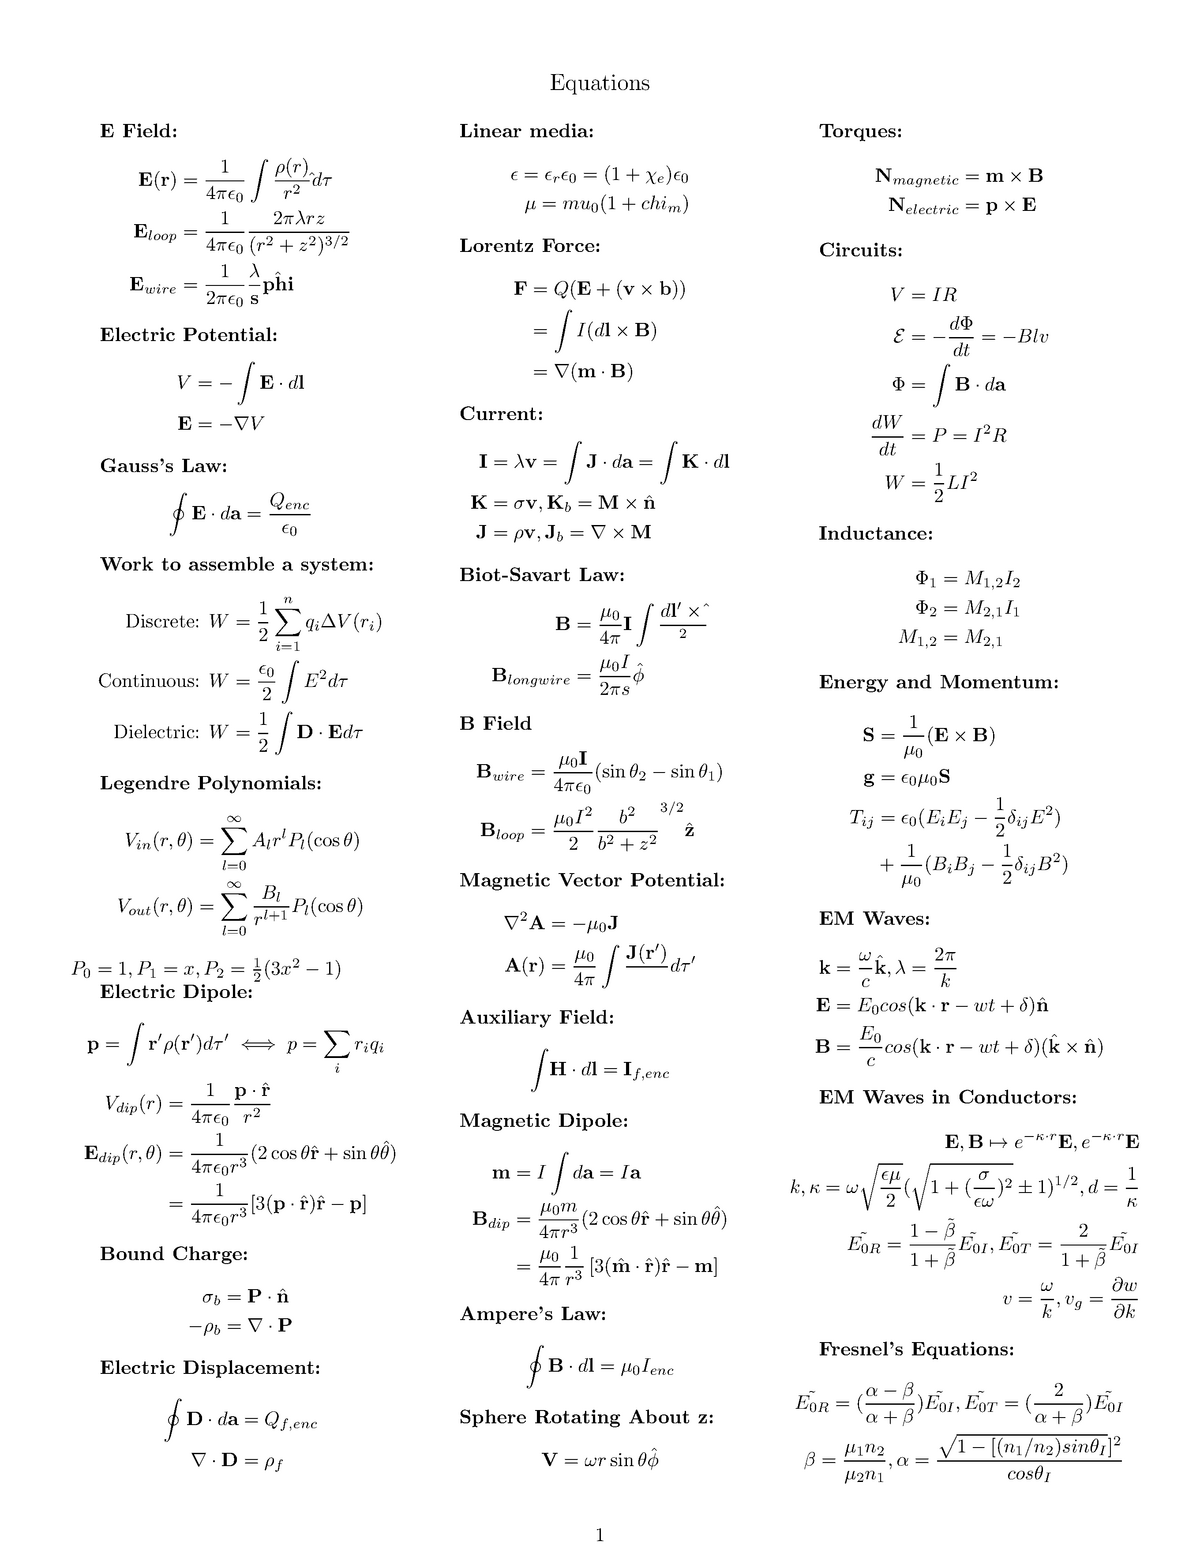 Final Equation Sheet - Summary Electromagnetic Theory II - Equations ...